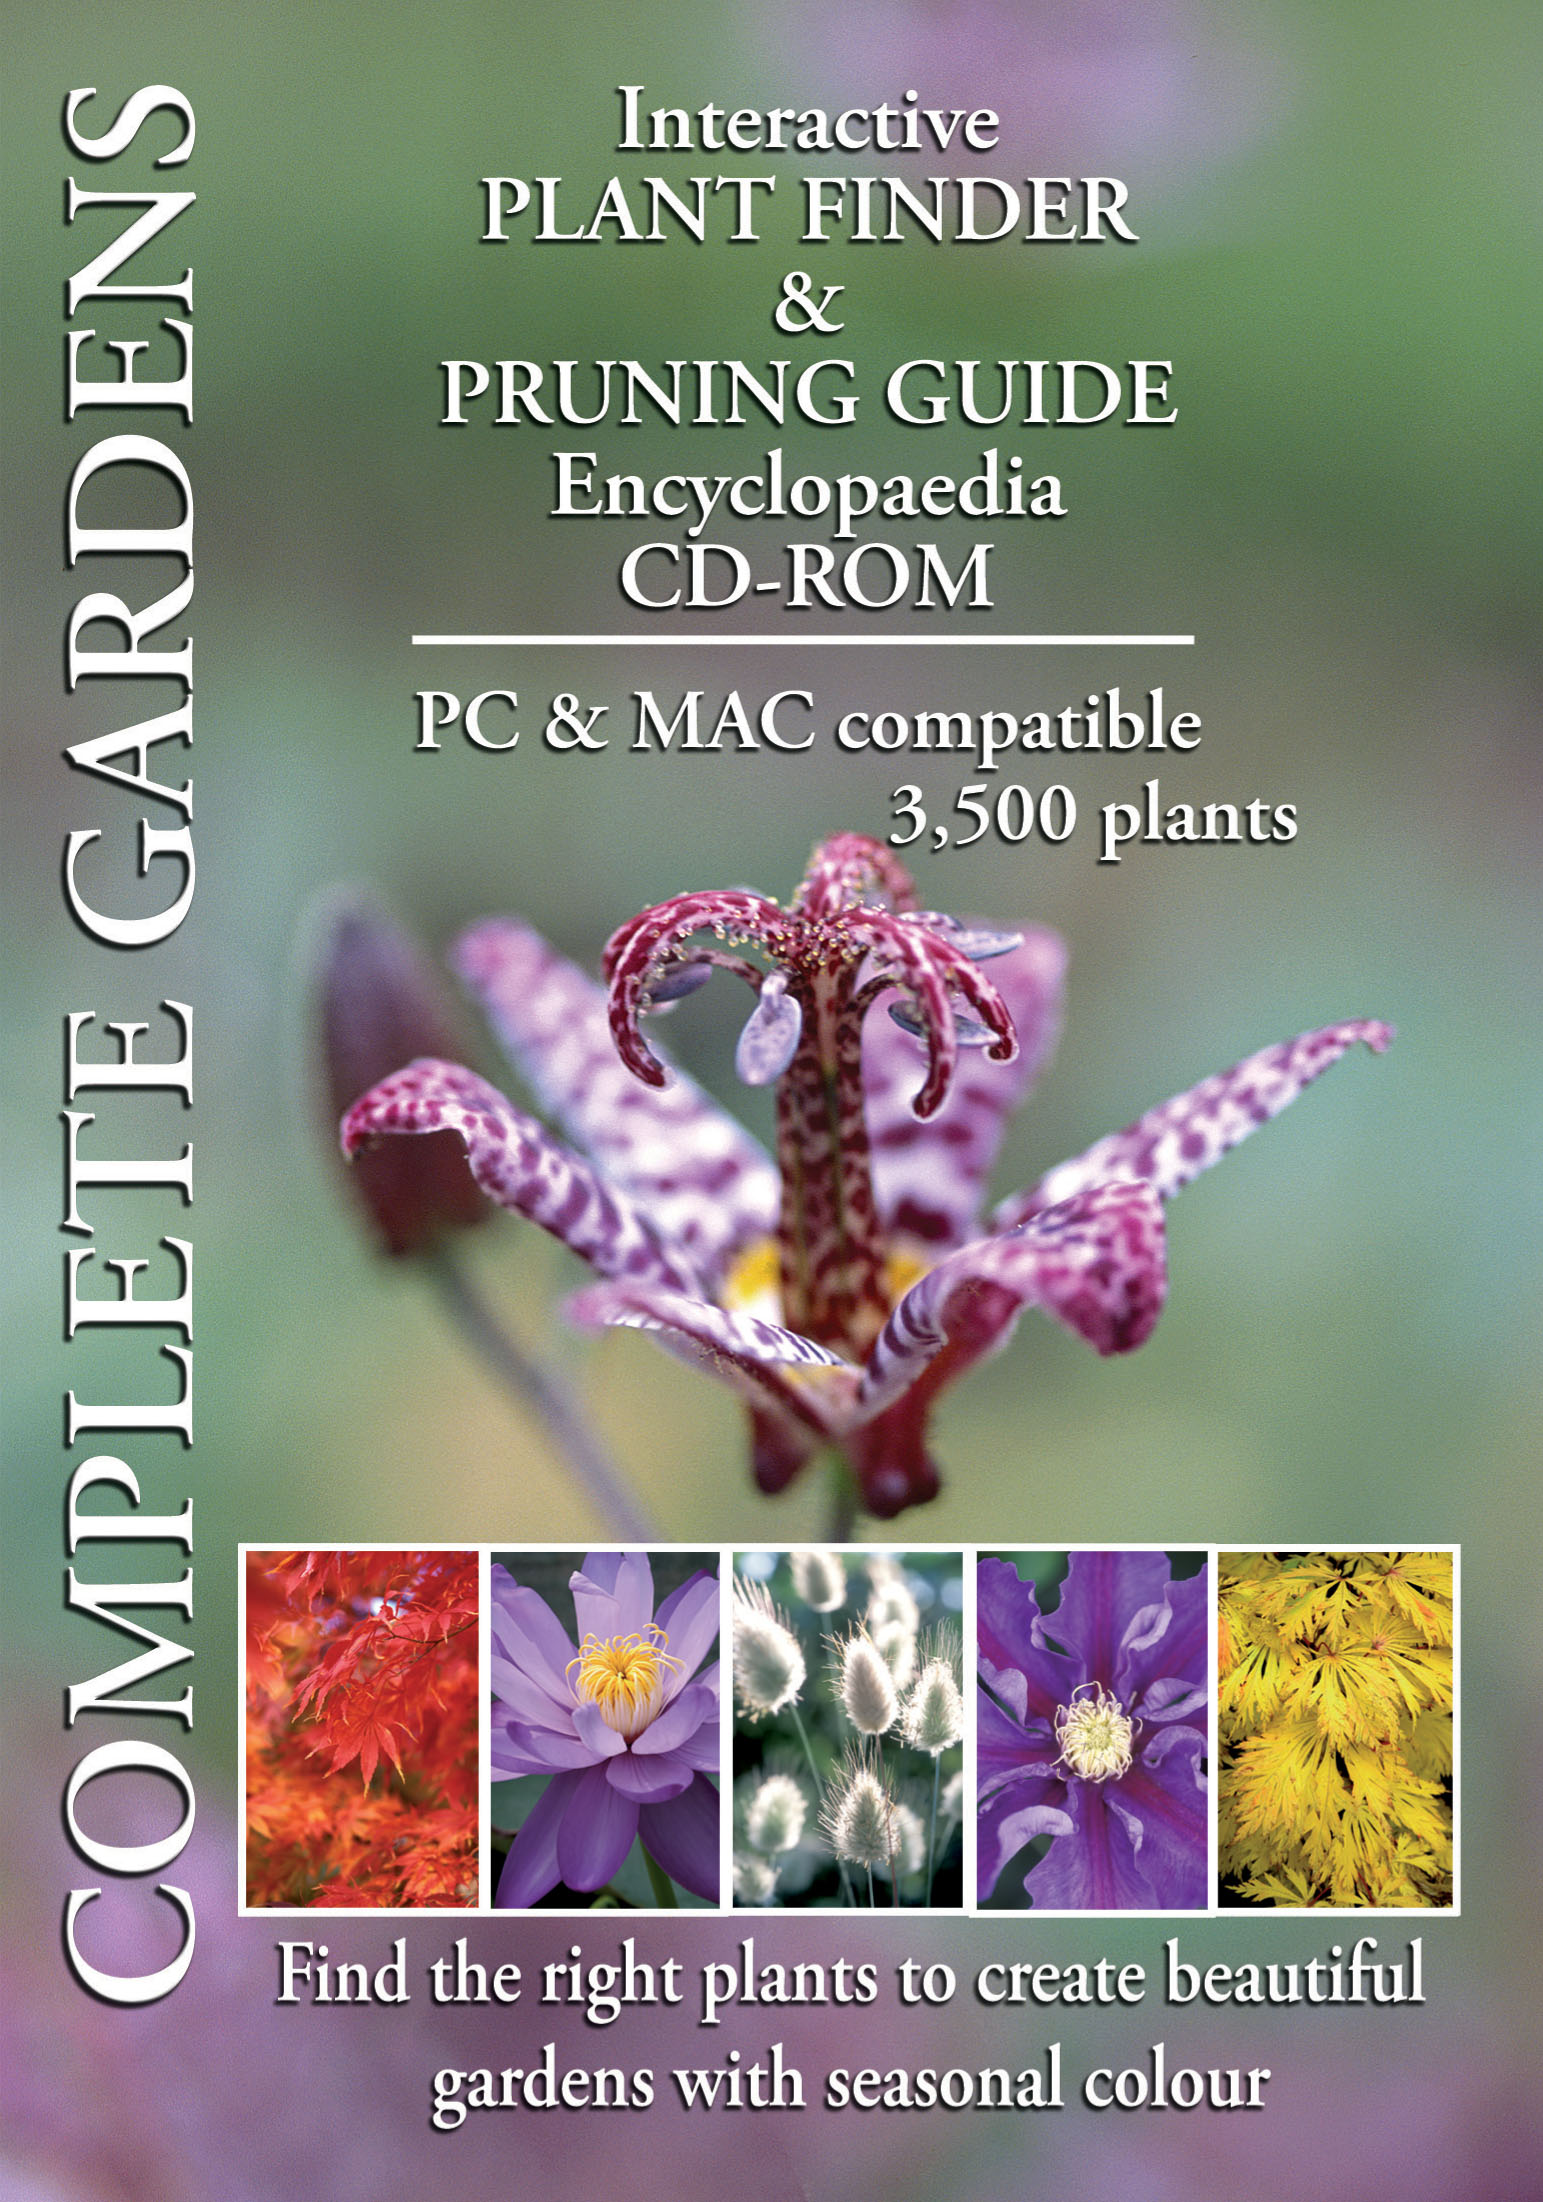 rhs wisley stock the latest complete gardens multi list plant finder